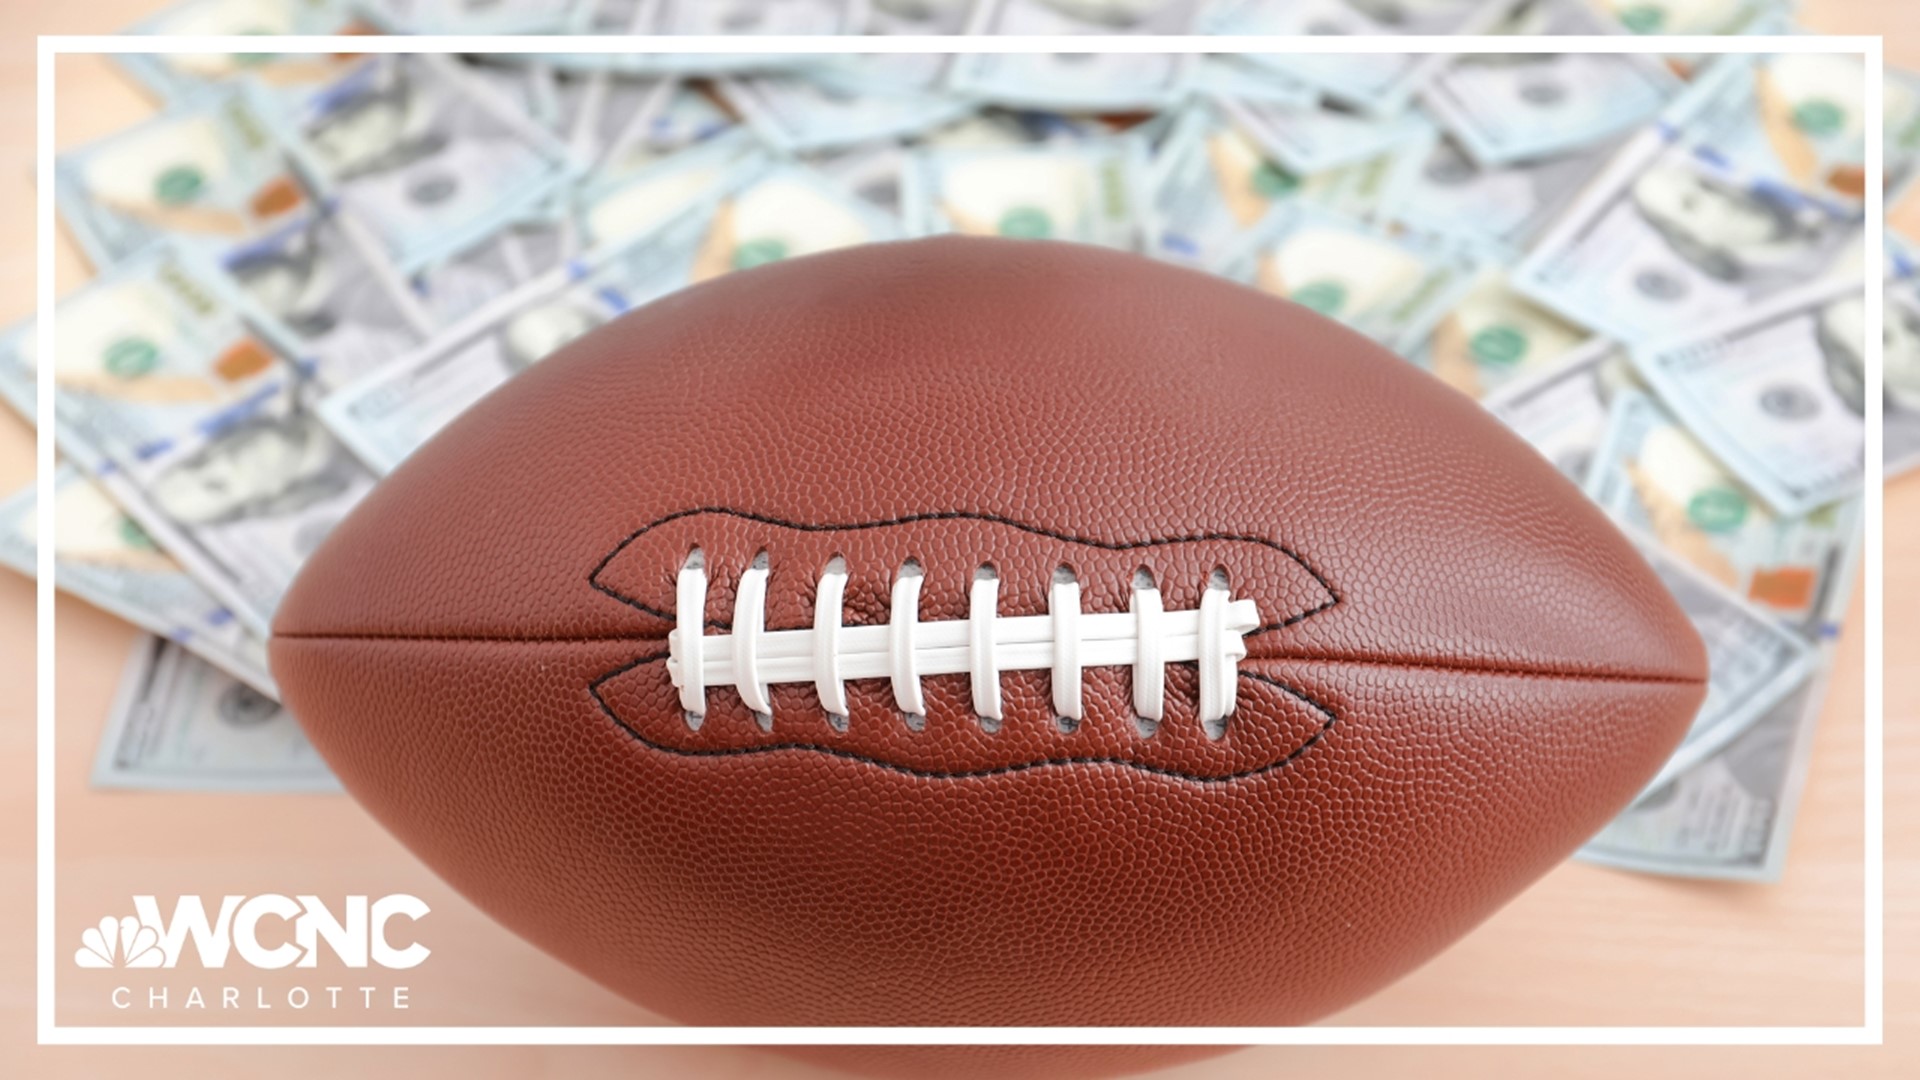 As name, image and likeness deals continue to pop up in college sports, an expert shares more about how college athletes could collectively bargain for payment.